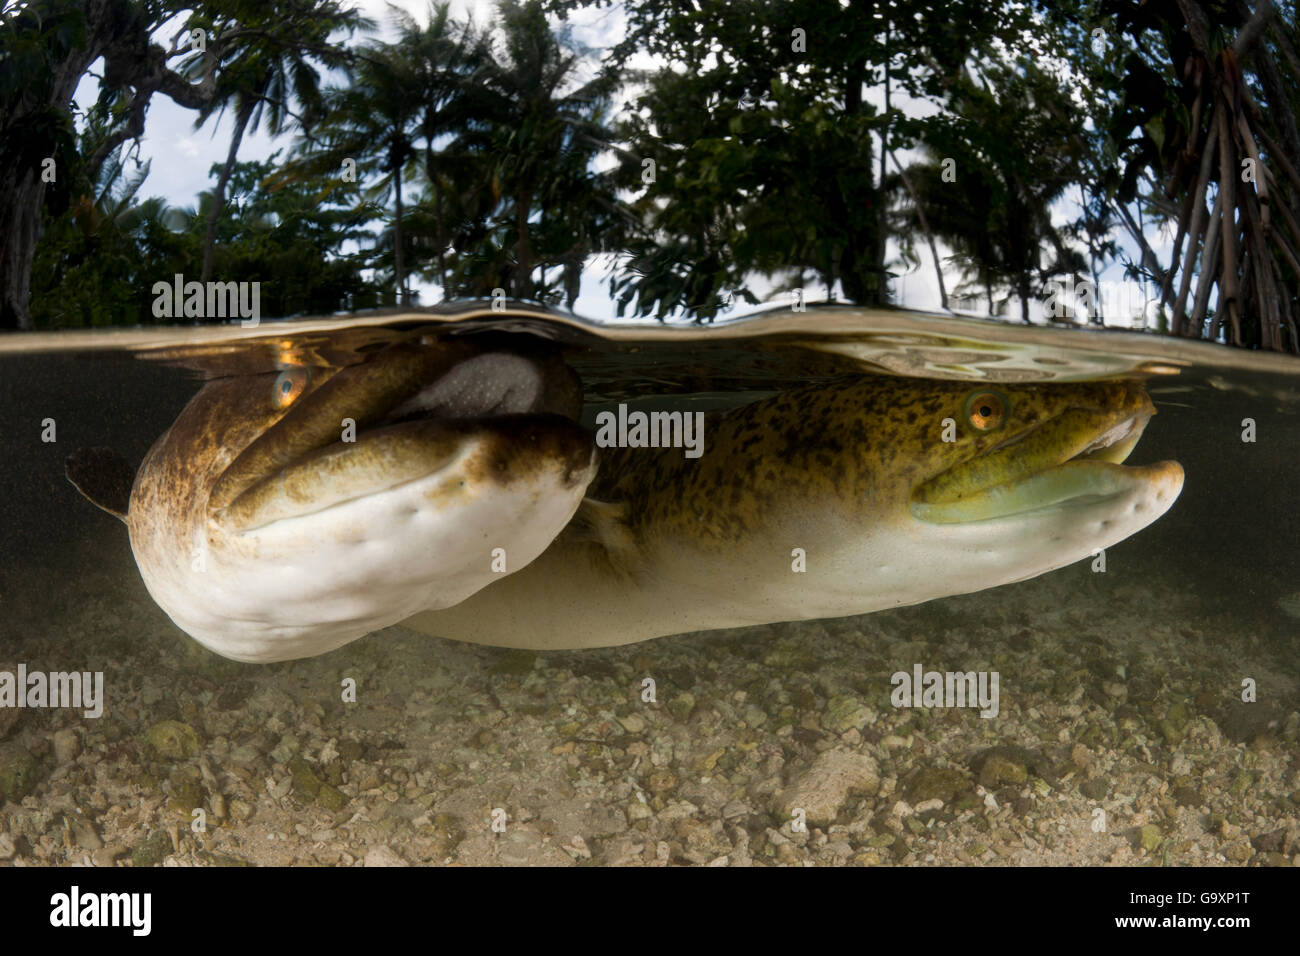 Giant mottled fresh water eels (Anguilla marmorata)  in shallows, split level view, Lissenung Island, Kavieng, New Guinea. Secon Stock Photo